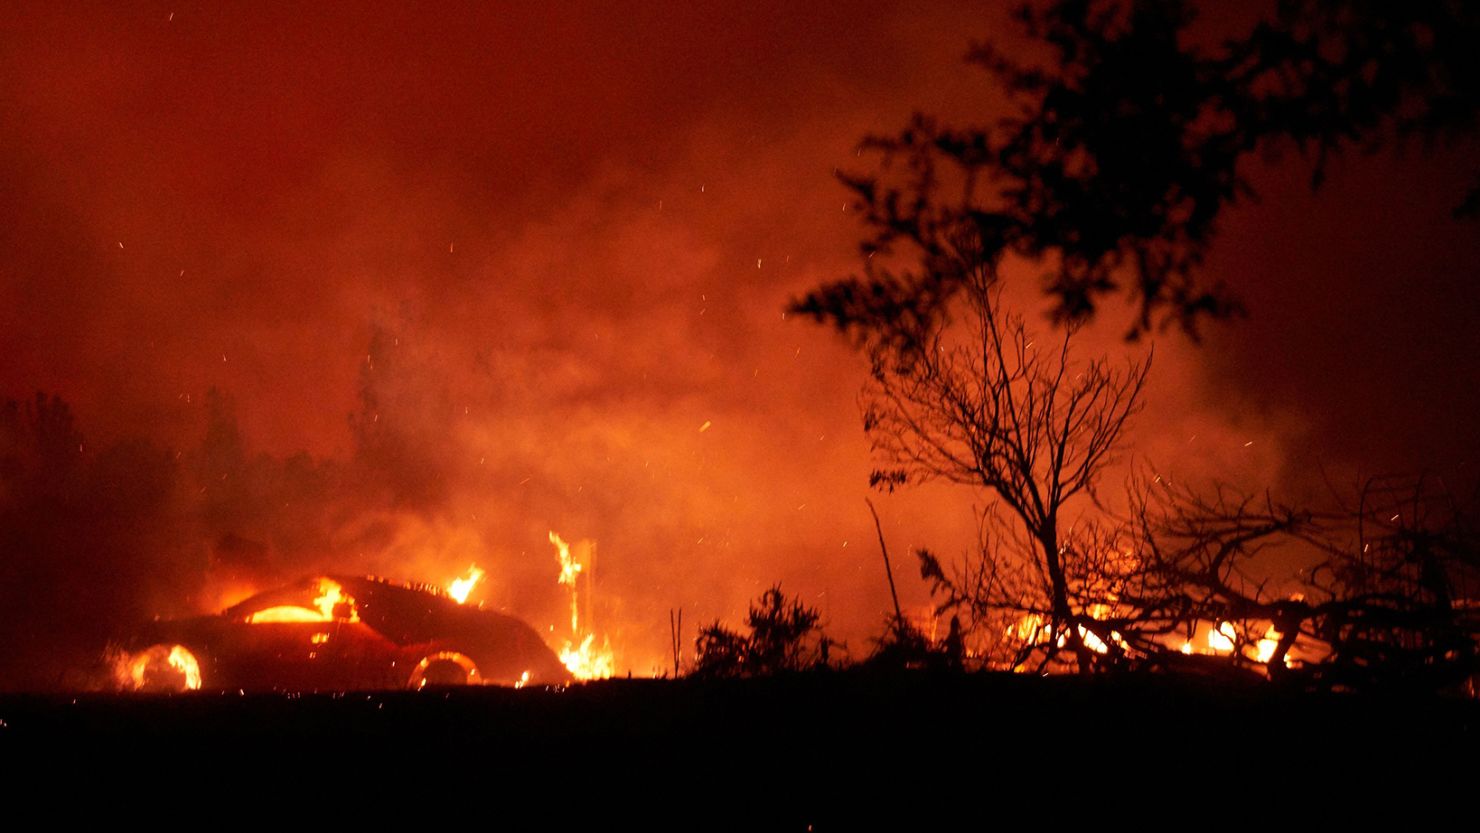 Four people died and hundreds of buildings were destroyed in the 2020 Zogg Fire in Northern California. 